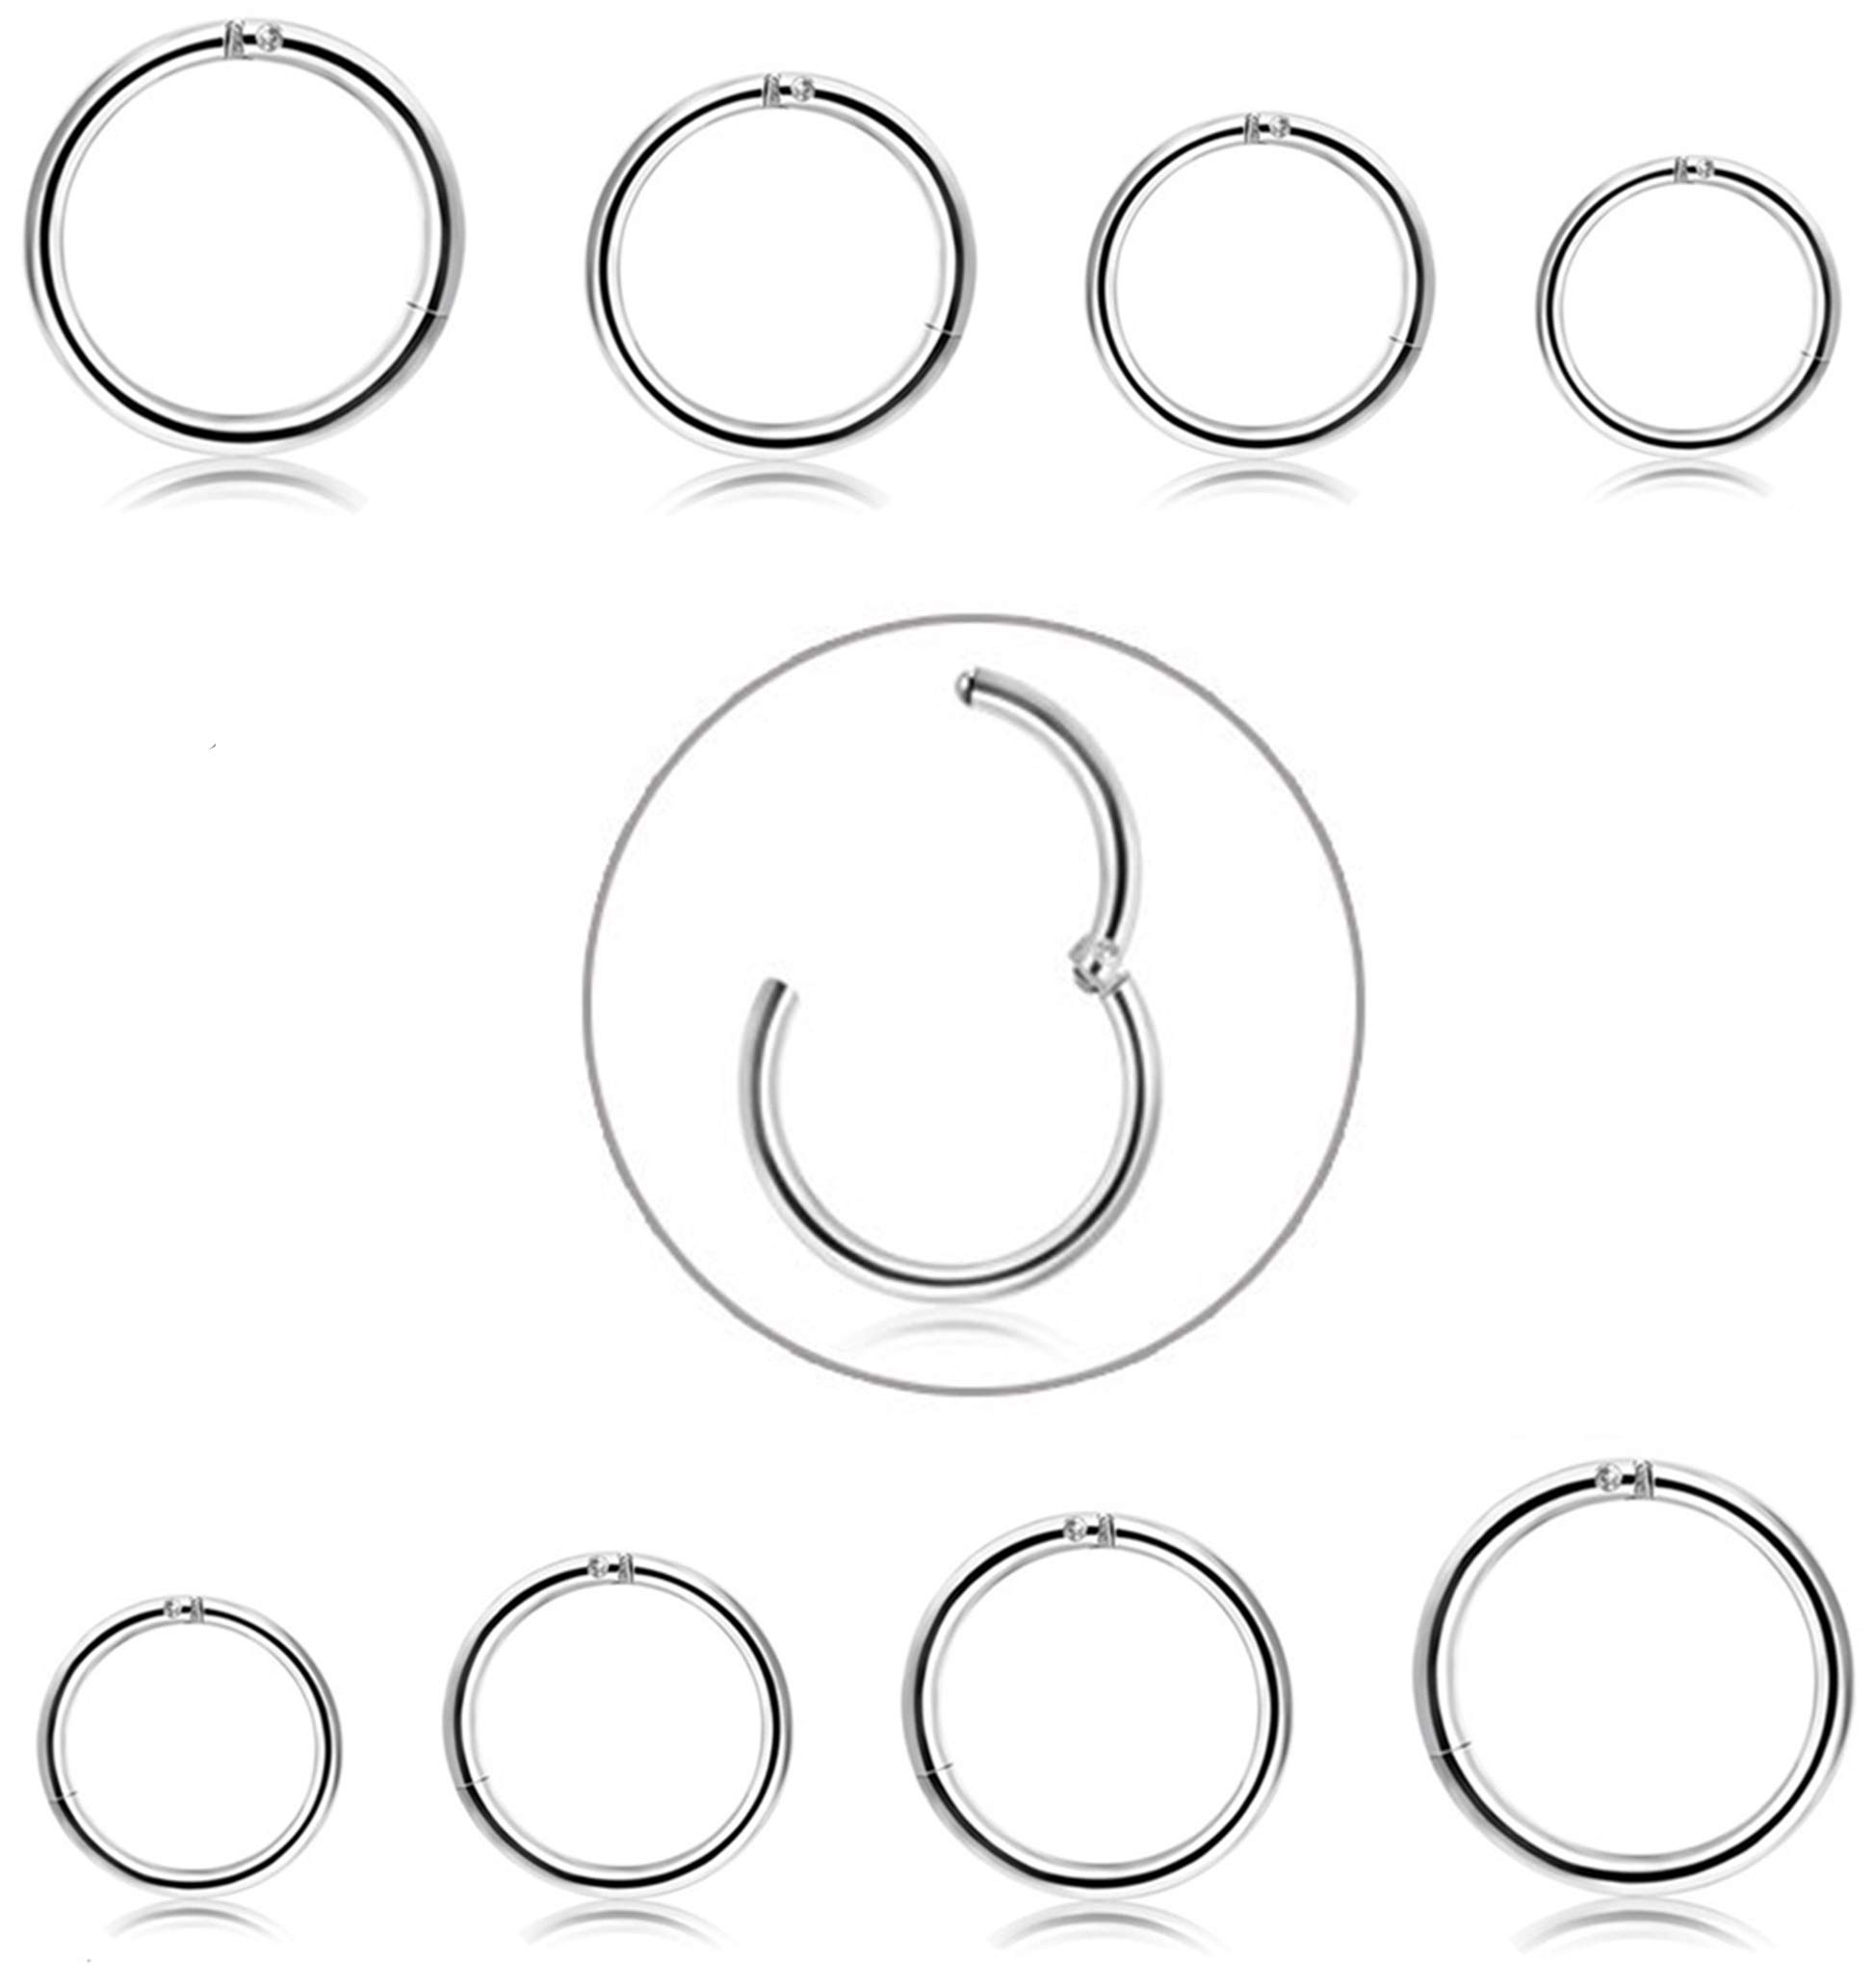 FIBO STEEL 6-8 Pcs 6-12mm Stainless Steel 16g 18g Cartilage Hoop Earrings for Men Women Nose Ring Helix Septum Couch Daith Lip Tragus Piercing Jewelry Set